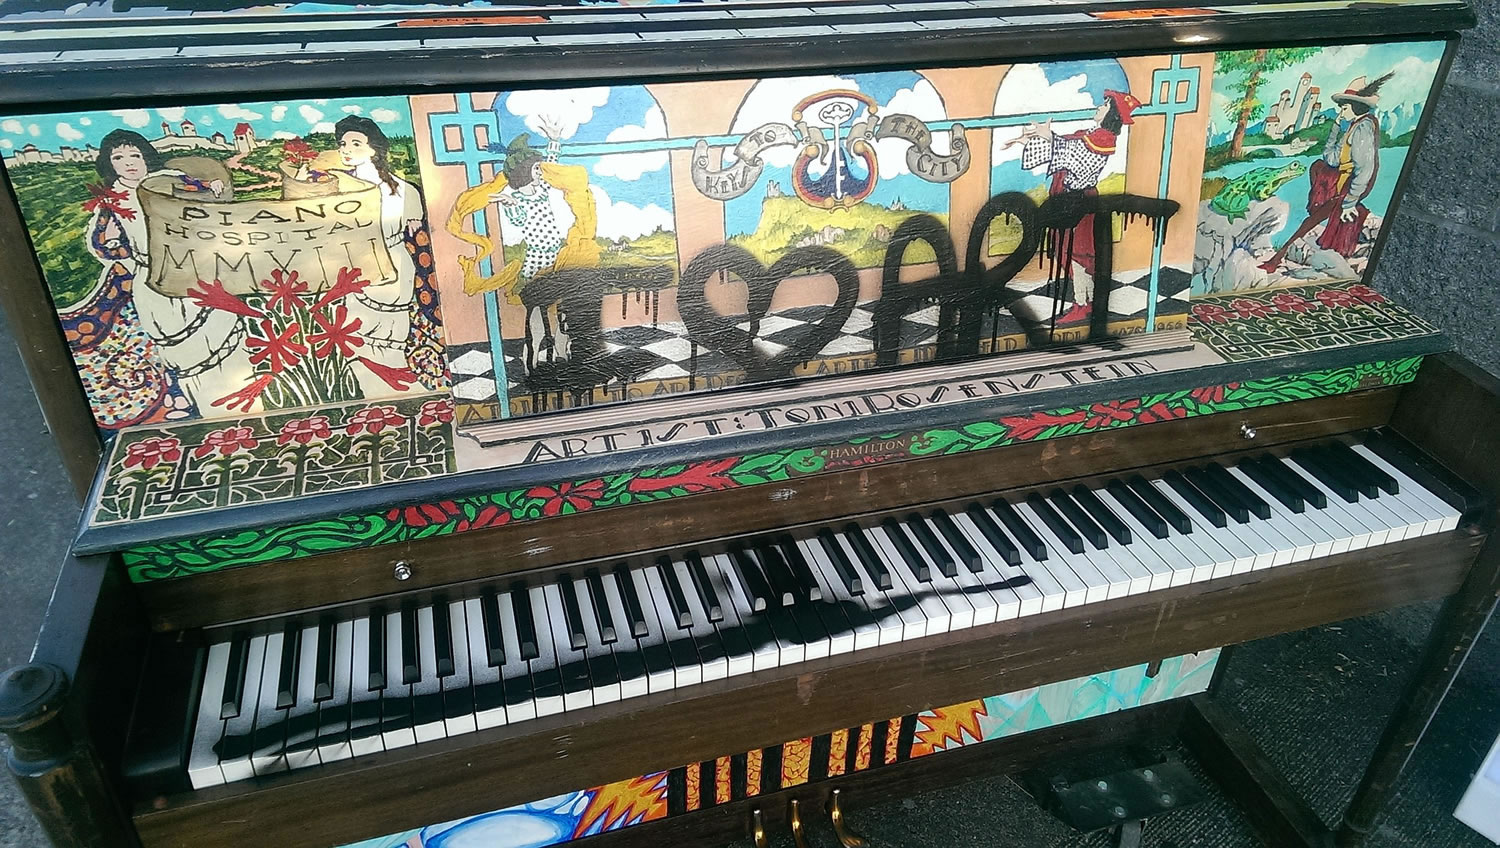 This piano, part of the Keys to the City fundraiser benefiting blind students, was vandalized late Saturday while it was on display along the Vancouver waterfront.